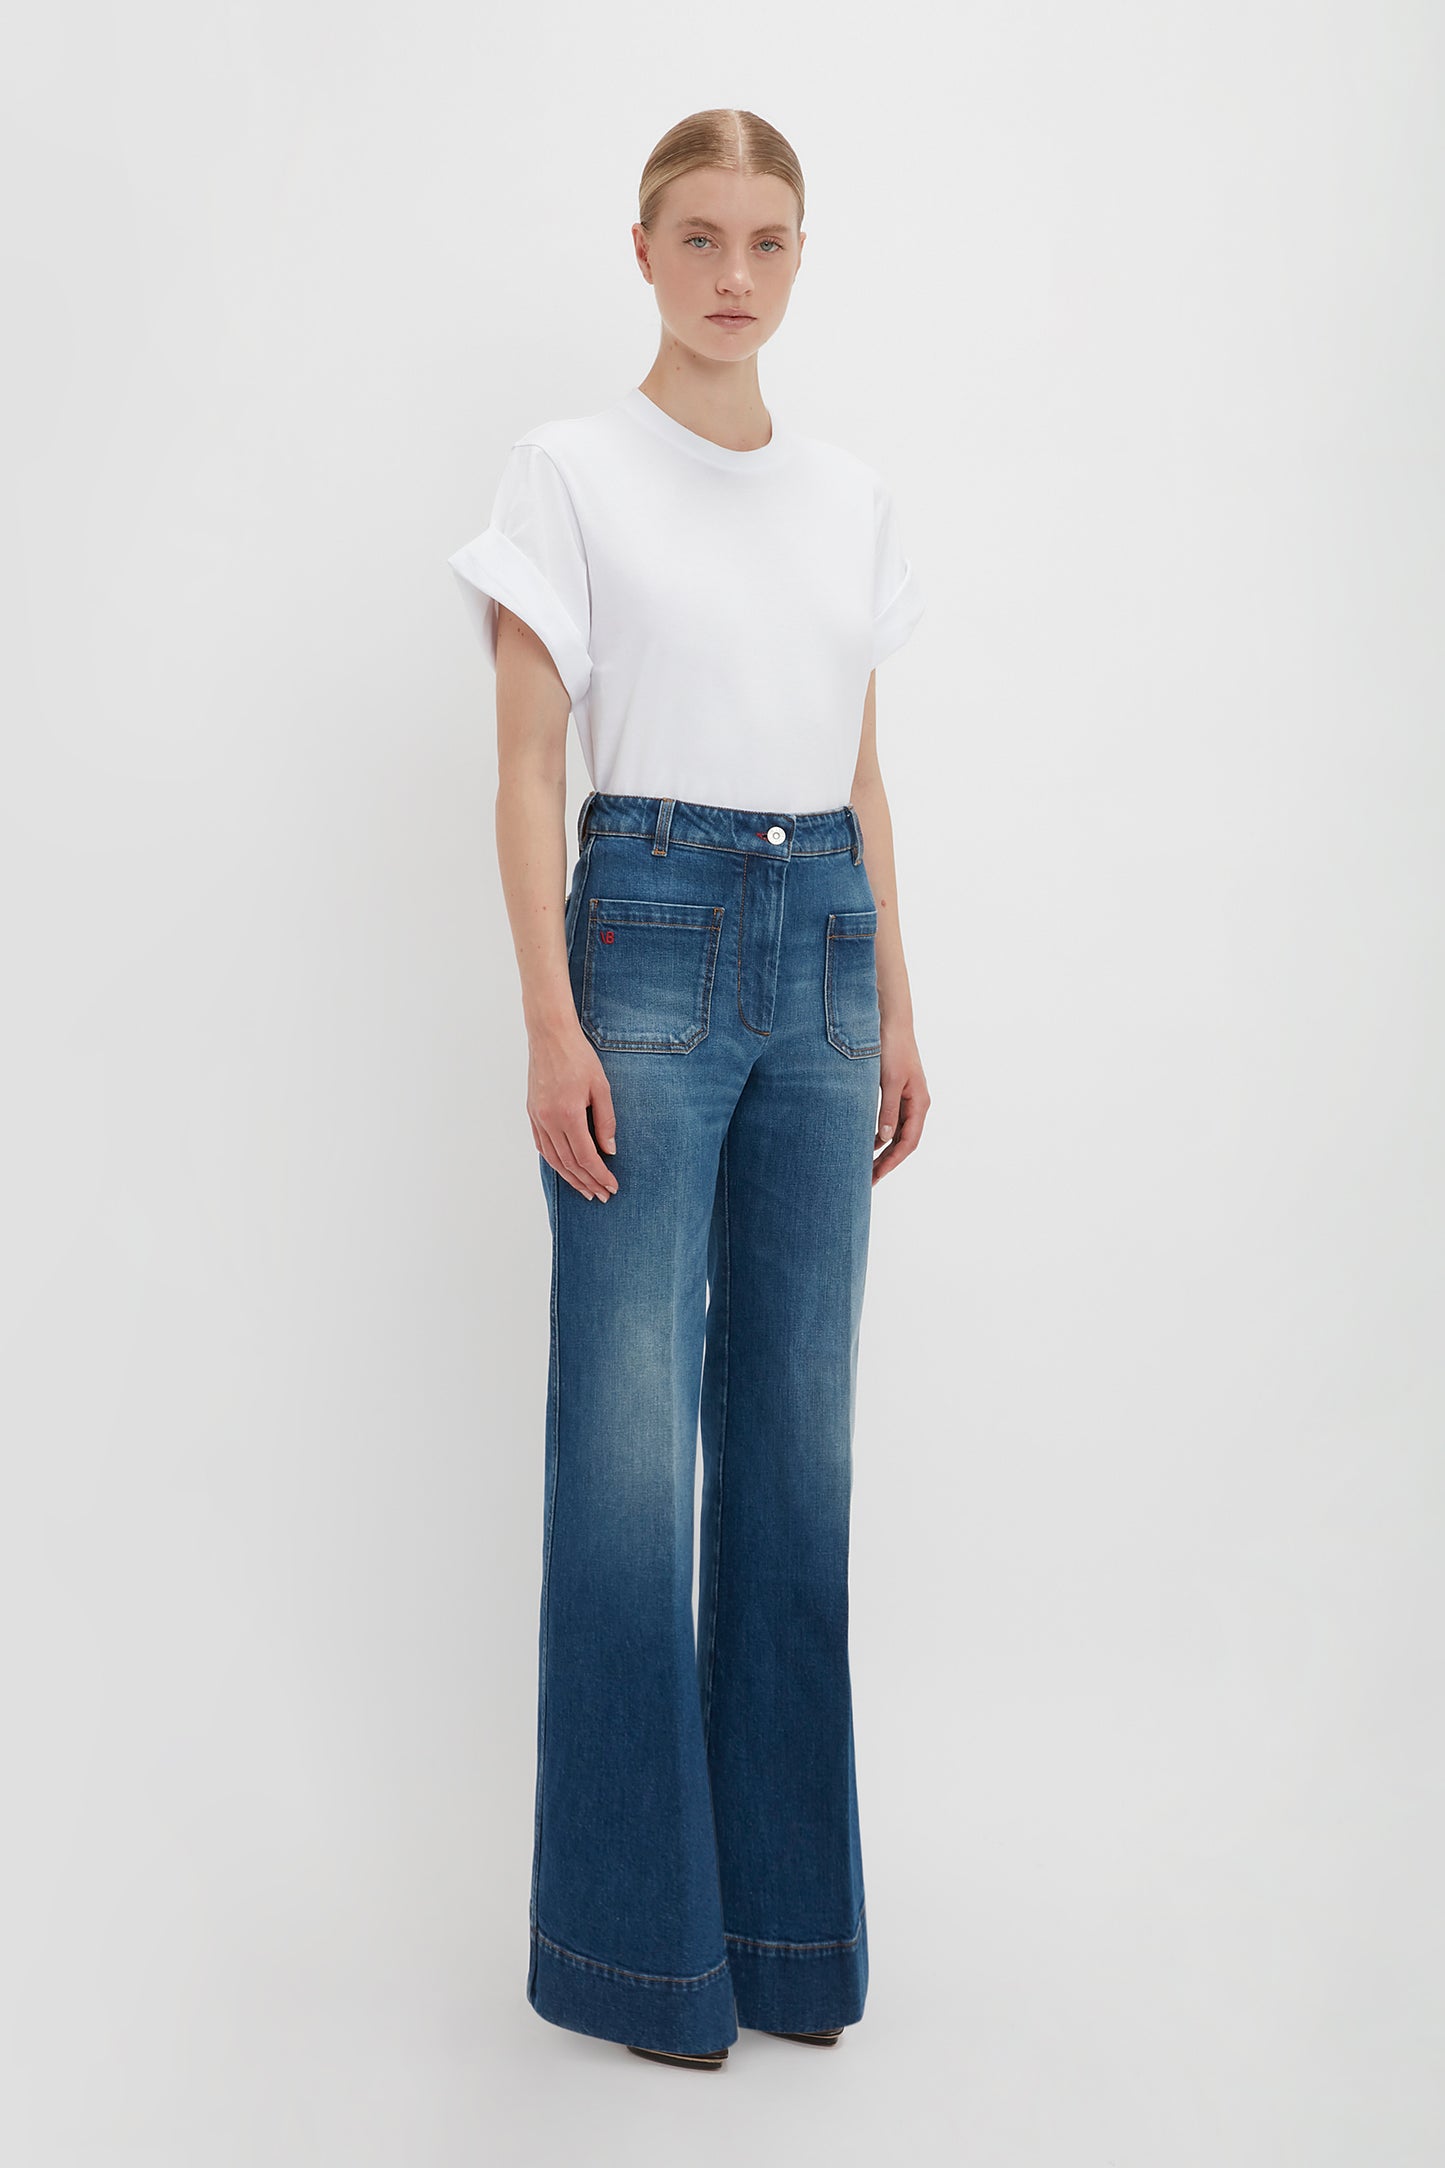 A woman stands facing forward wearing an oversized white Victoria Beckham T-shirt and blue high-waisted flared jeans in dark vintage wash against a plain white background.